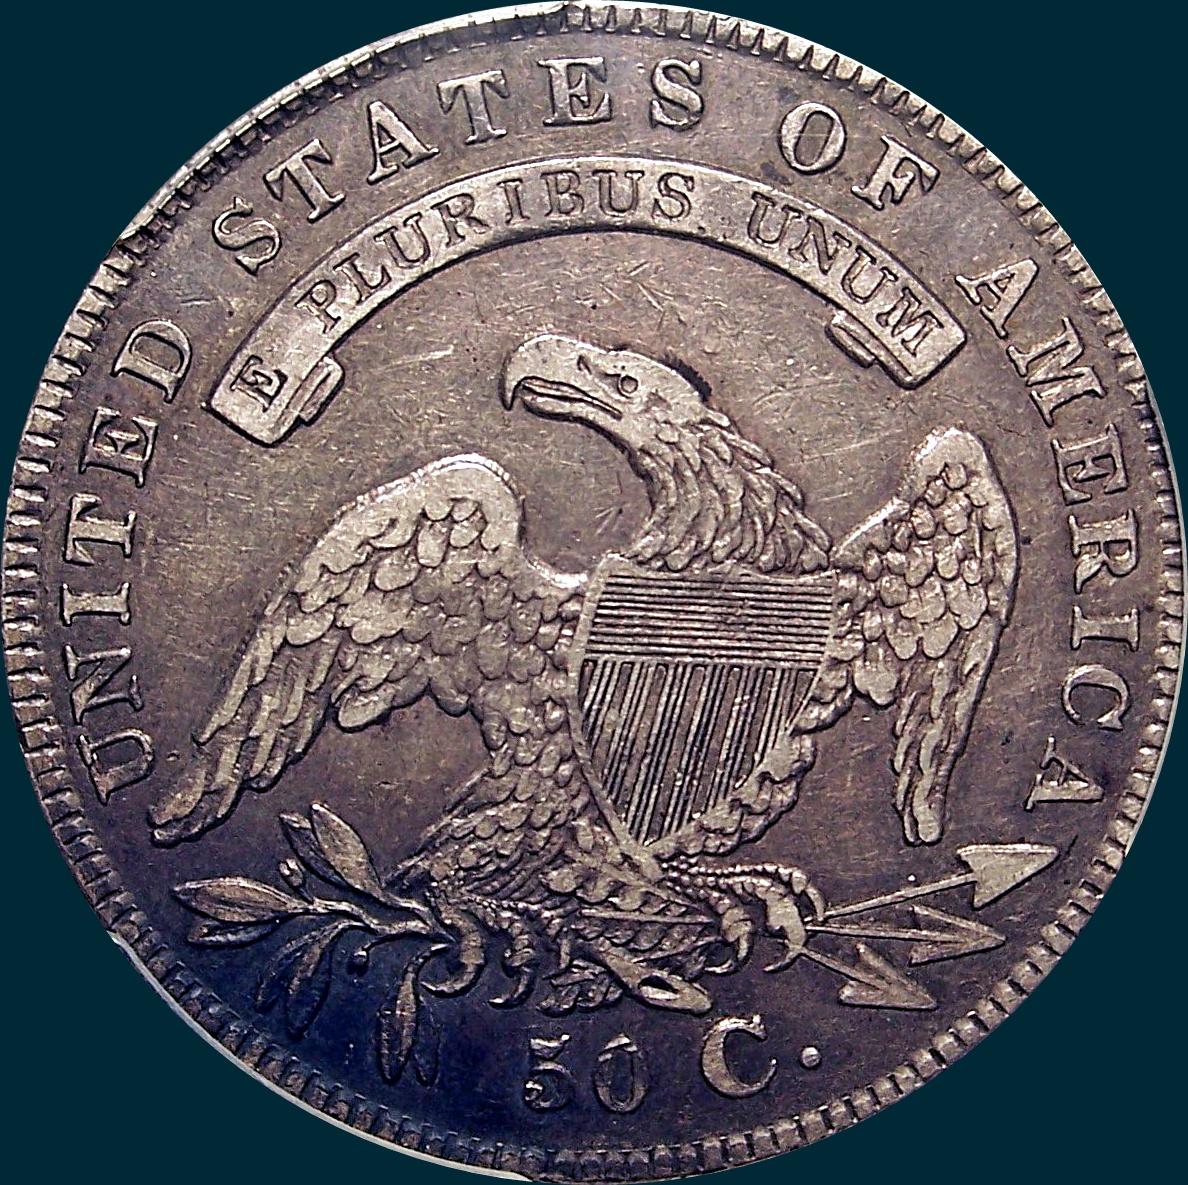 1836, O-108, 1836 over 1336, Capped Bust, Half Dollar